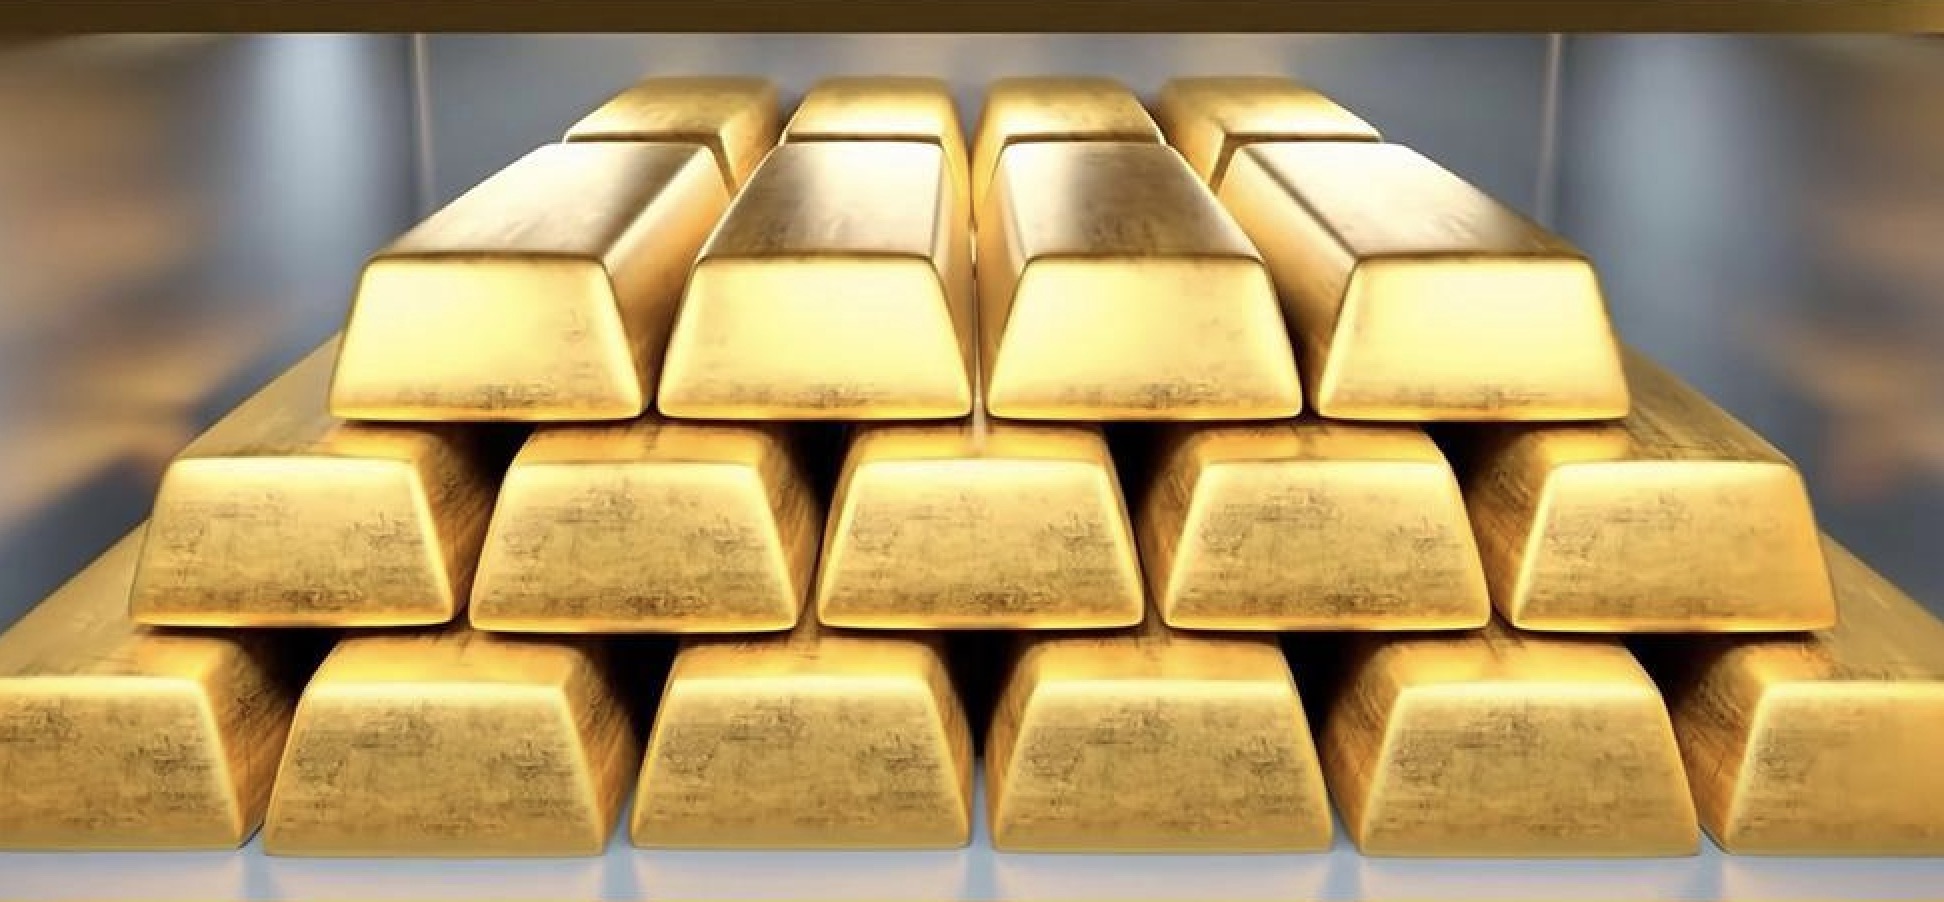 Everbright Futures: Short-term gold prices remain weak and volatile, pay attention to the Fed’s March interest rate decision